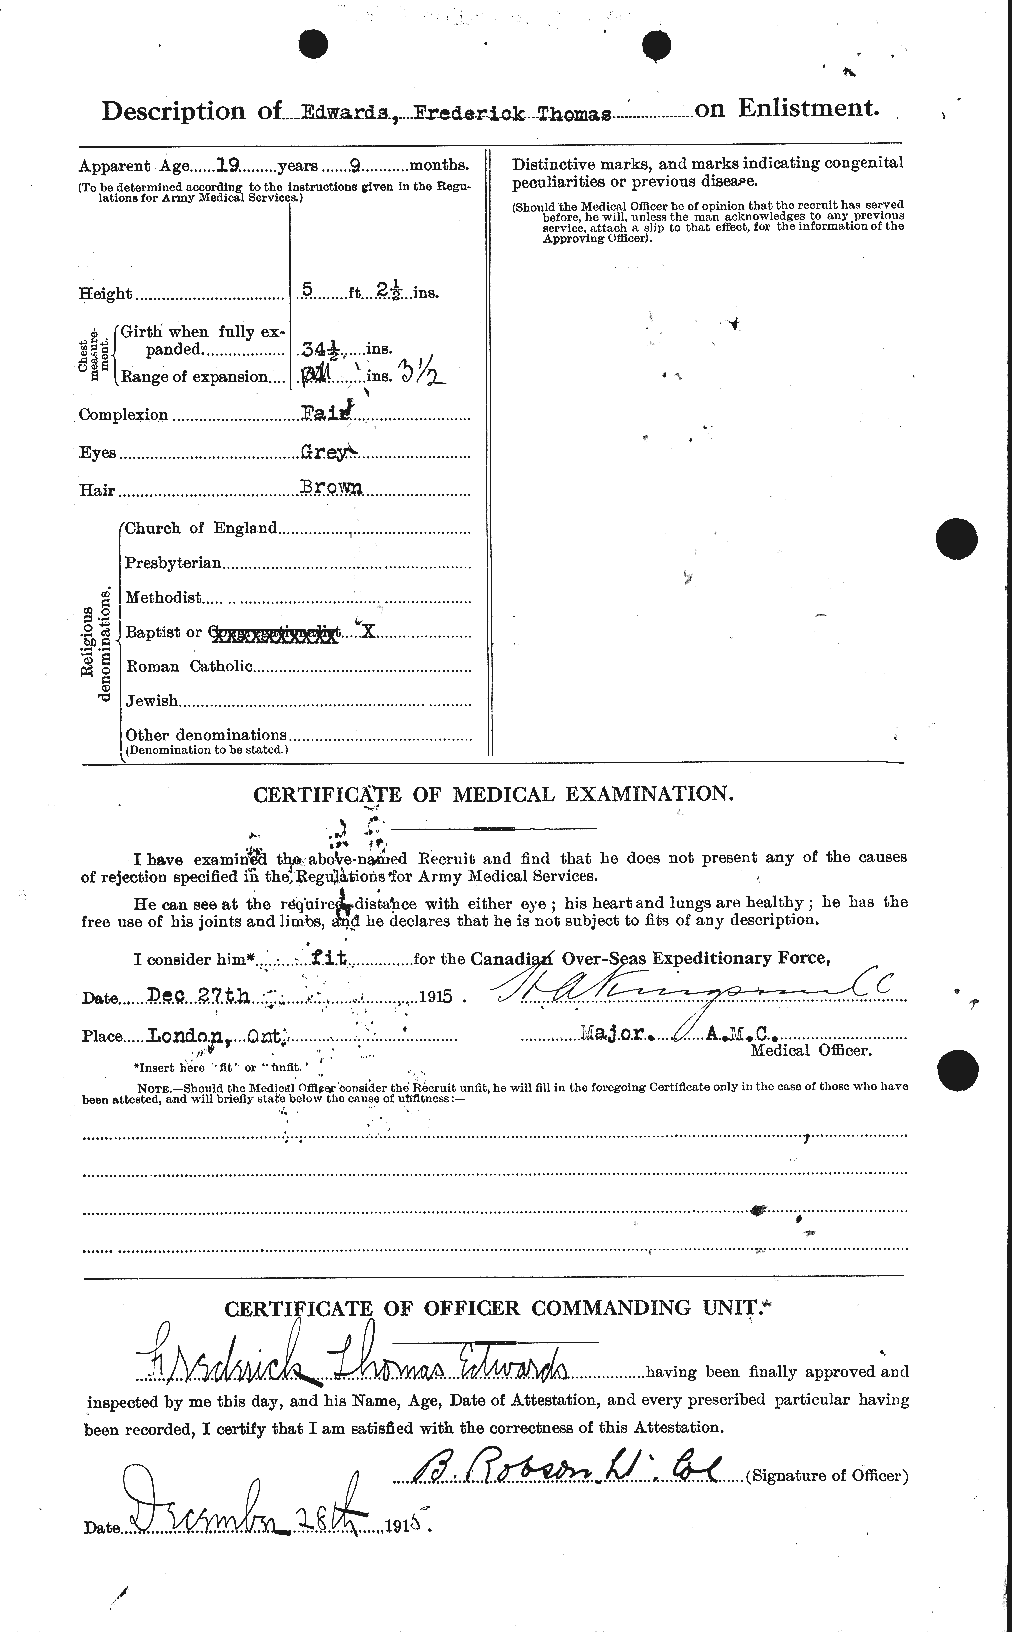 Personnel Records of the First World War - CEF 309079b